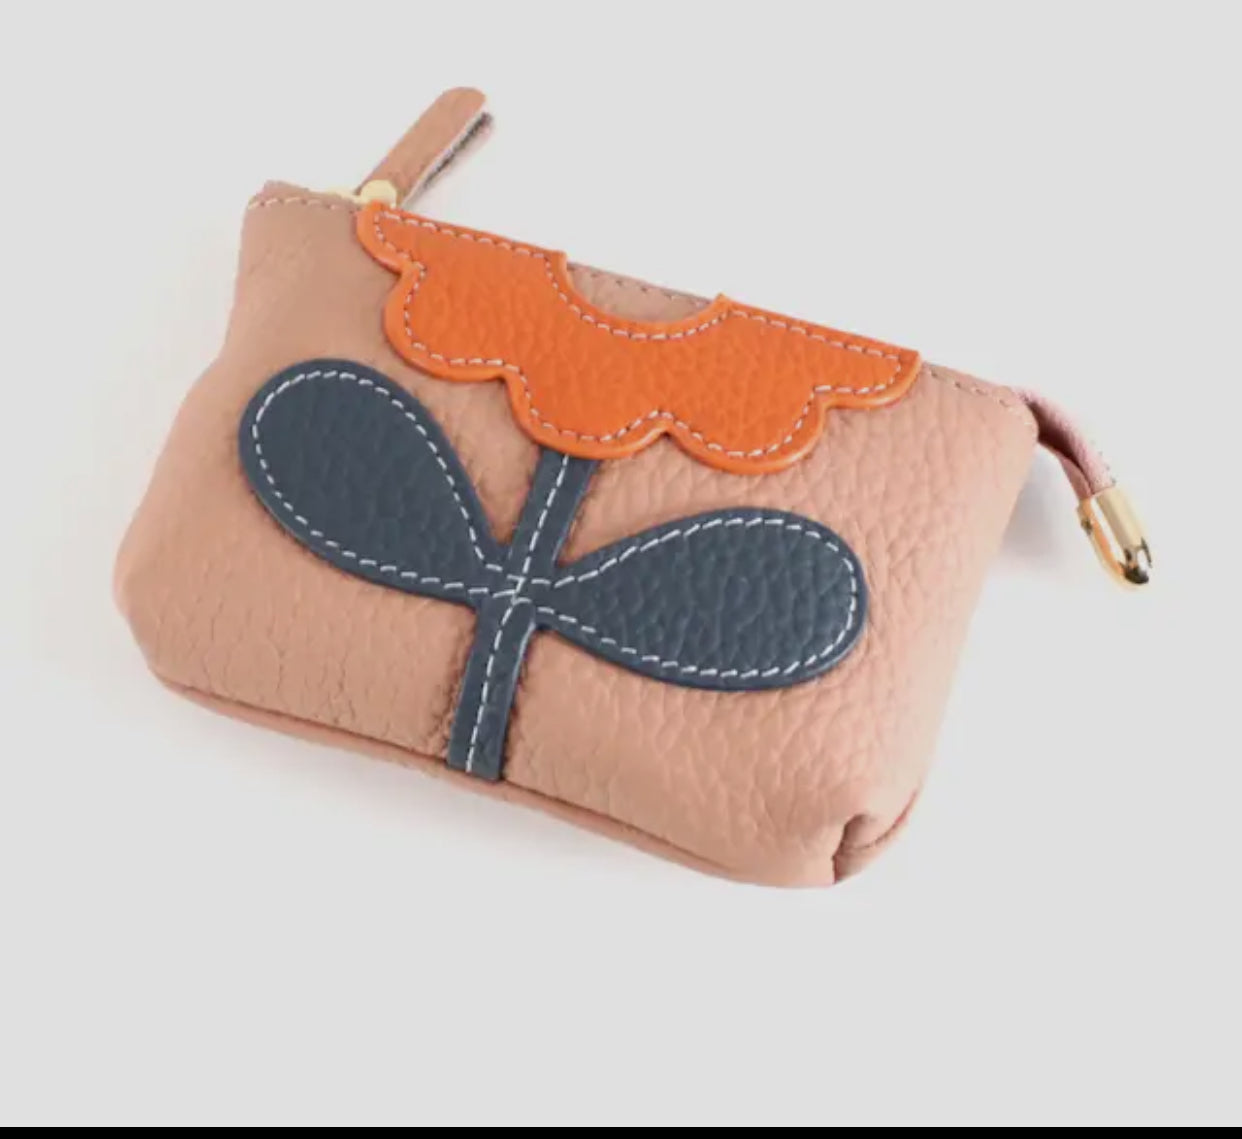 Flower Coin Purse With Keychain